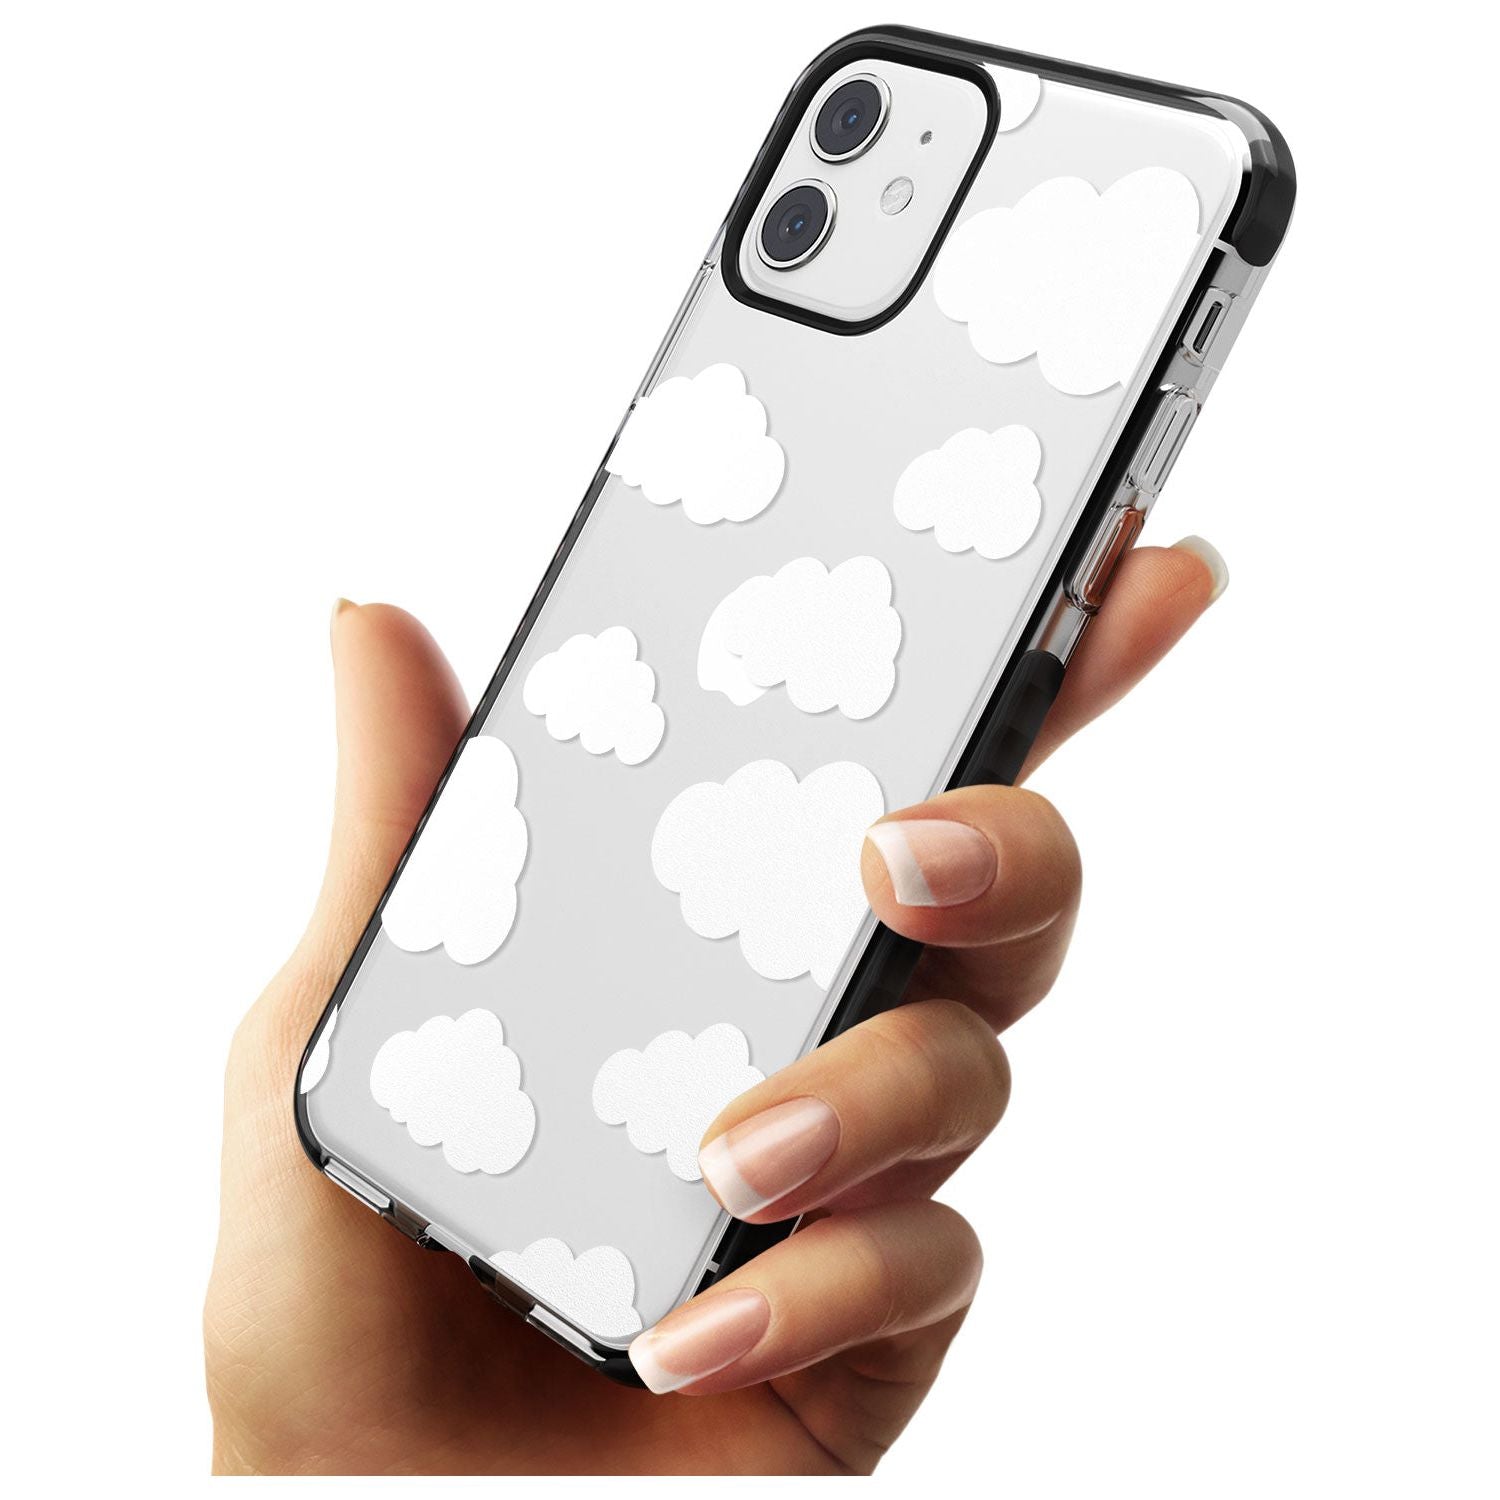 Transparent Cloud Pattern Pink Fade Impact Phone Case for iPhone 11 Pro Max